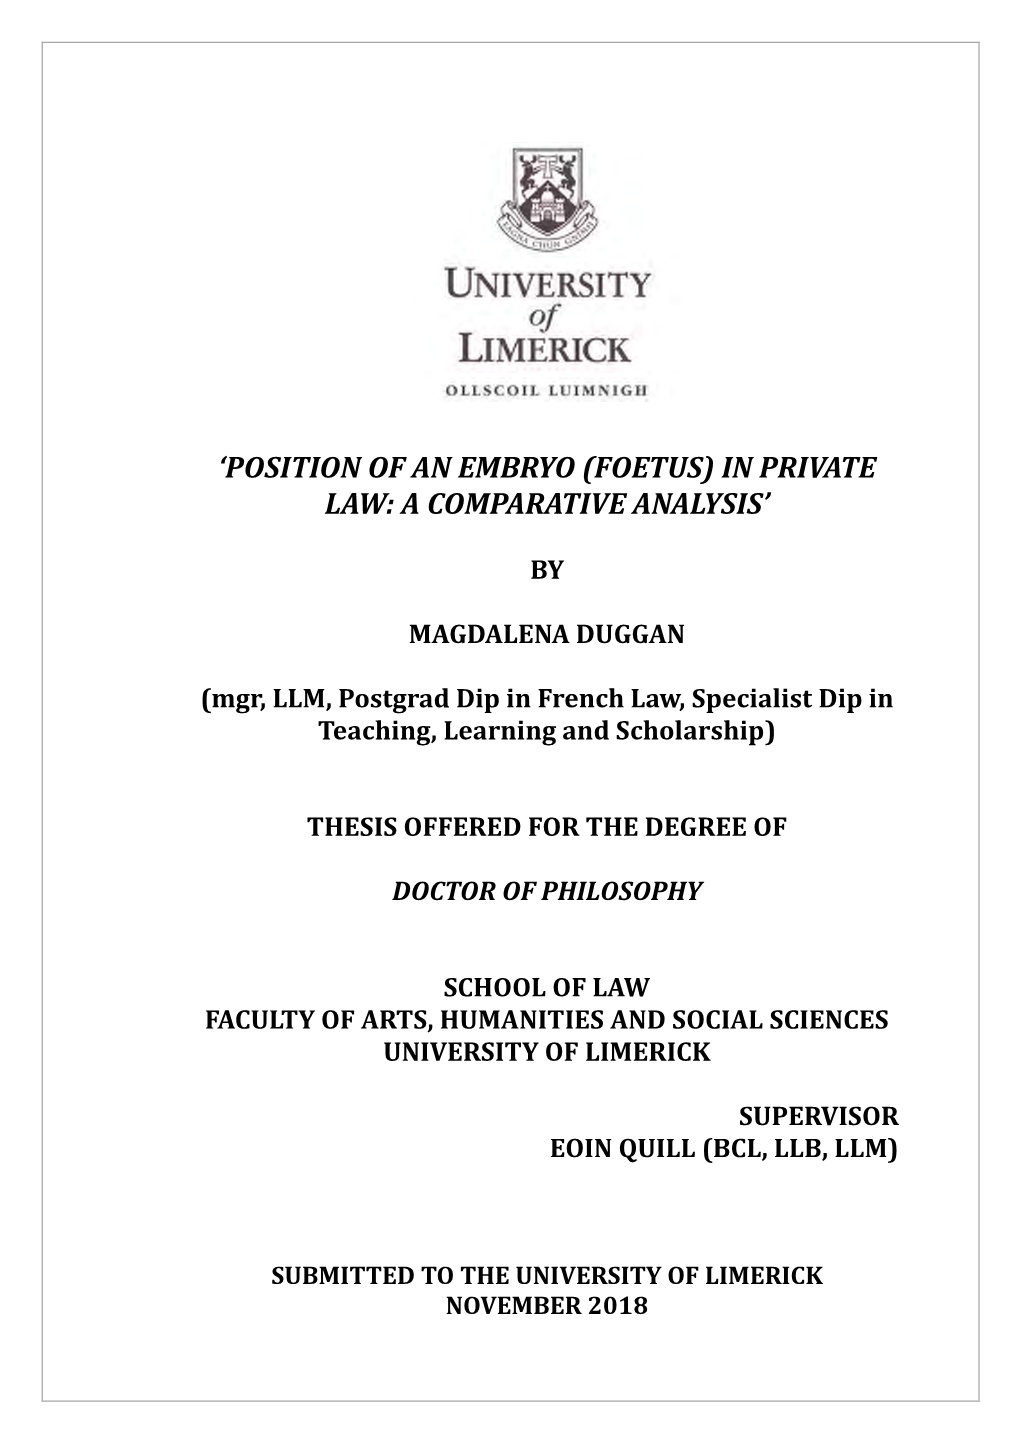 'Position of an Embryo (Foetus) in Private Law: A